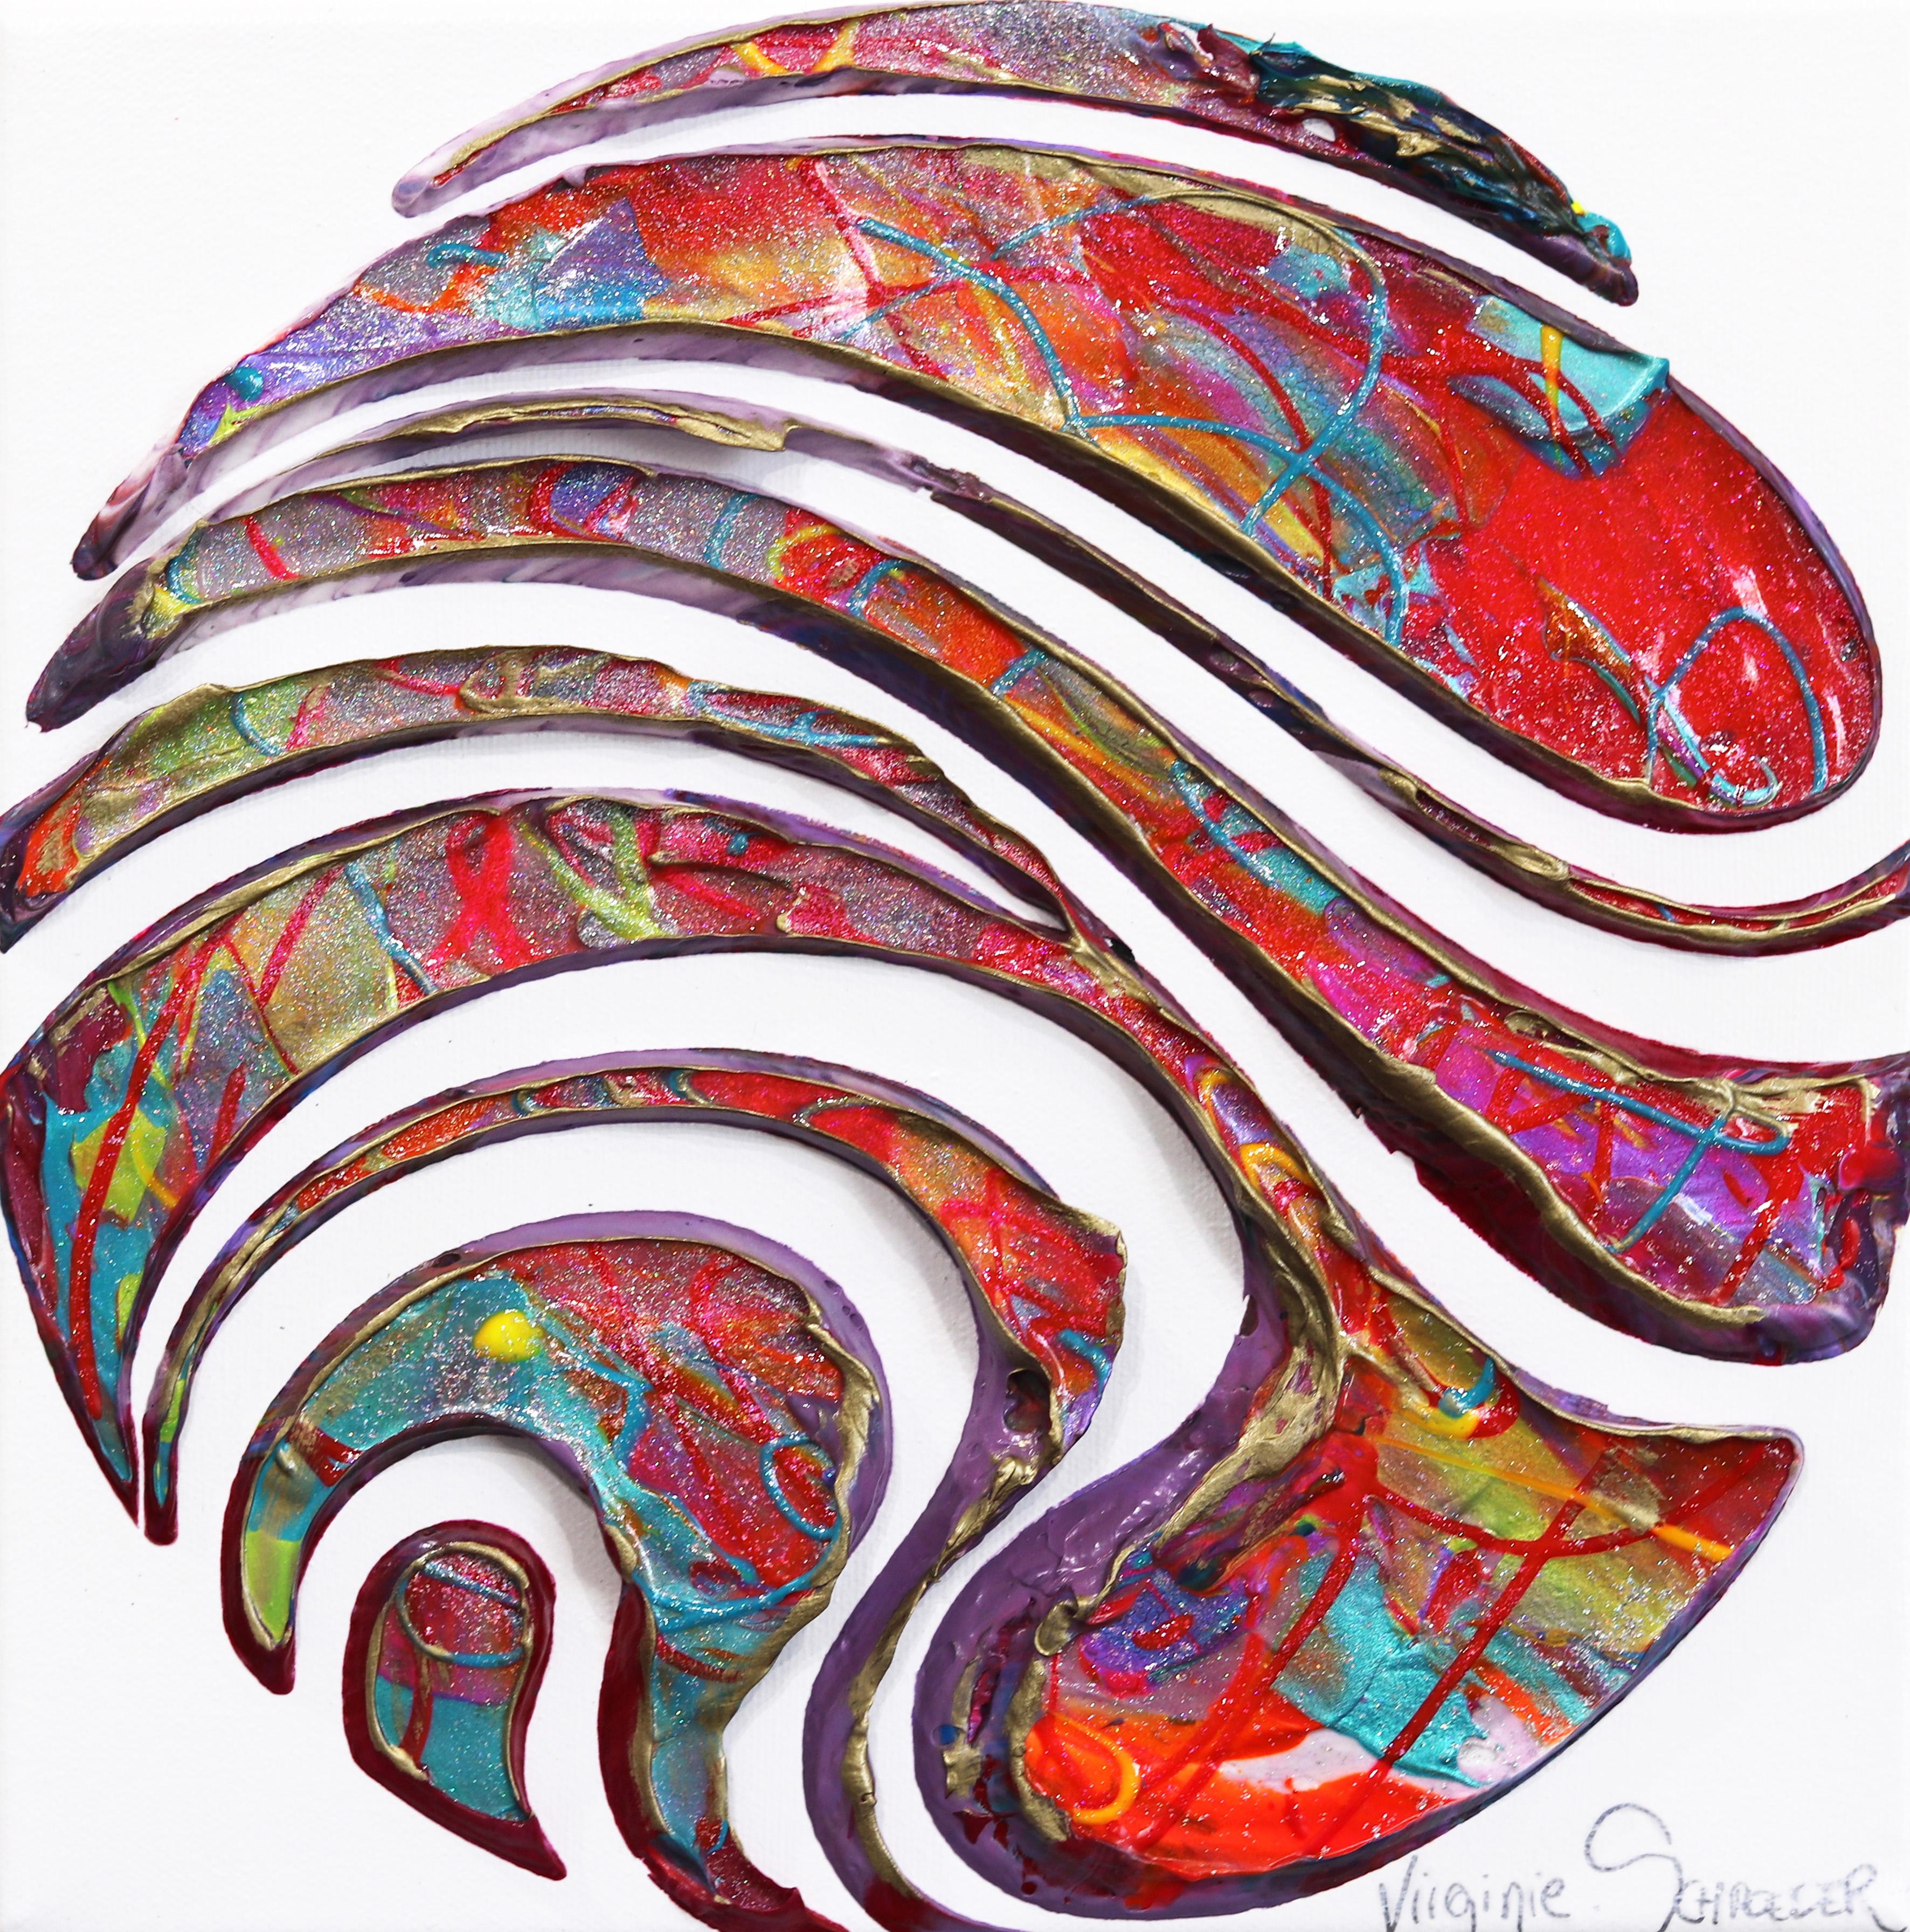 Find Your Dream and Focus - Colorful Abstract 3D Circle Textural Painting - Art by Virginie Schroeder